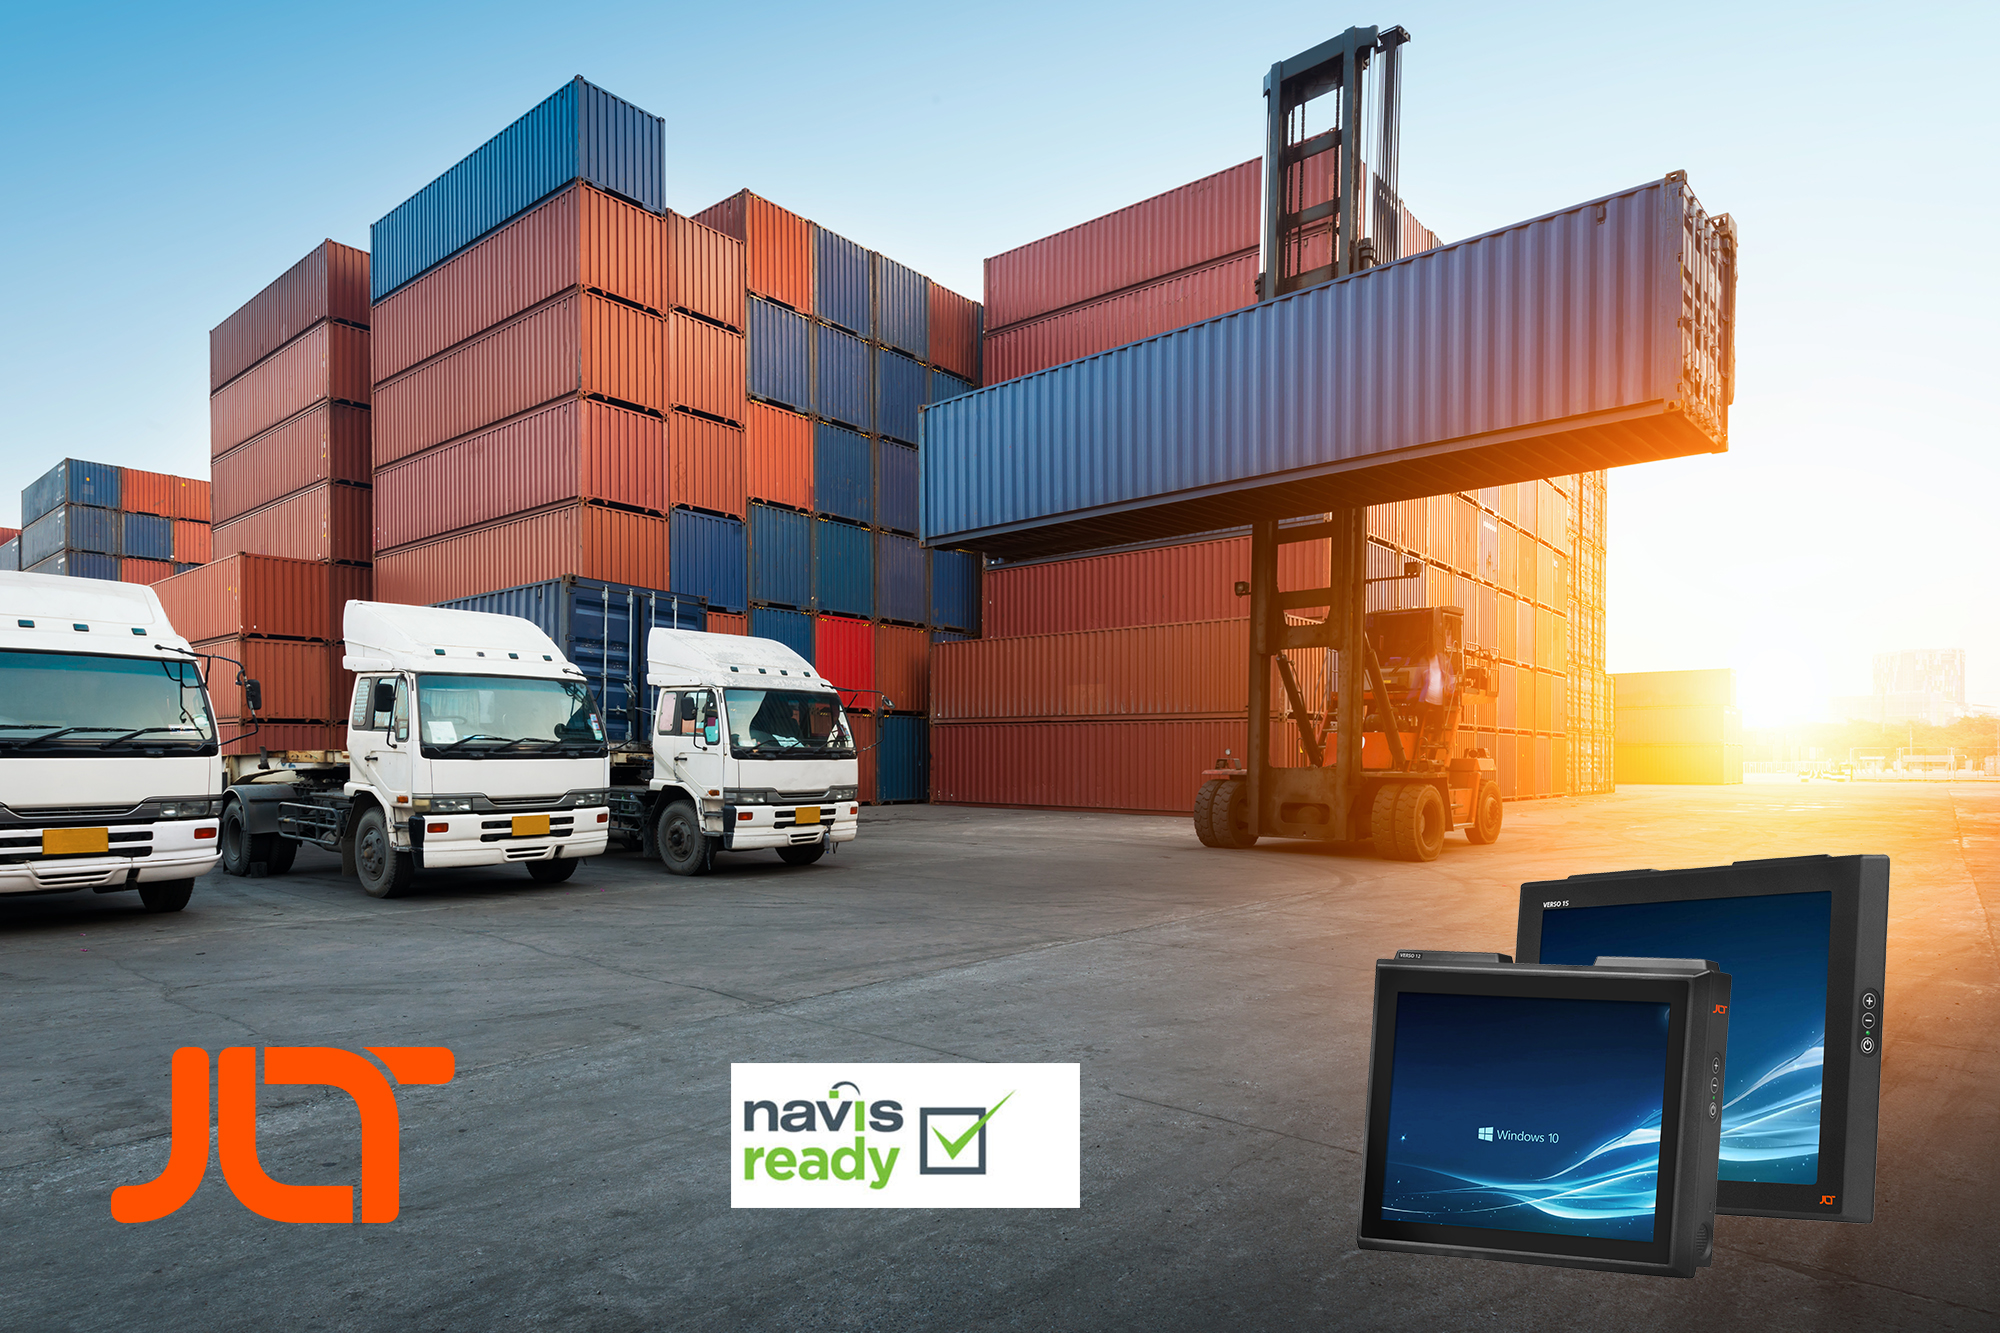 Available in a range of screen sizes and featuring Intel® Core™ i3 or i7 processors, the Navis Ready JLT VERSO computers are validated to run the most